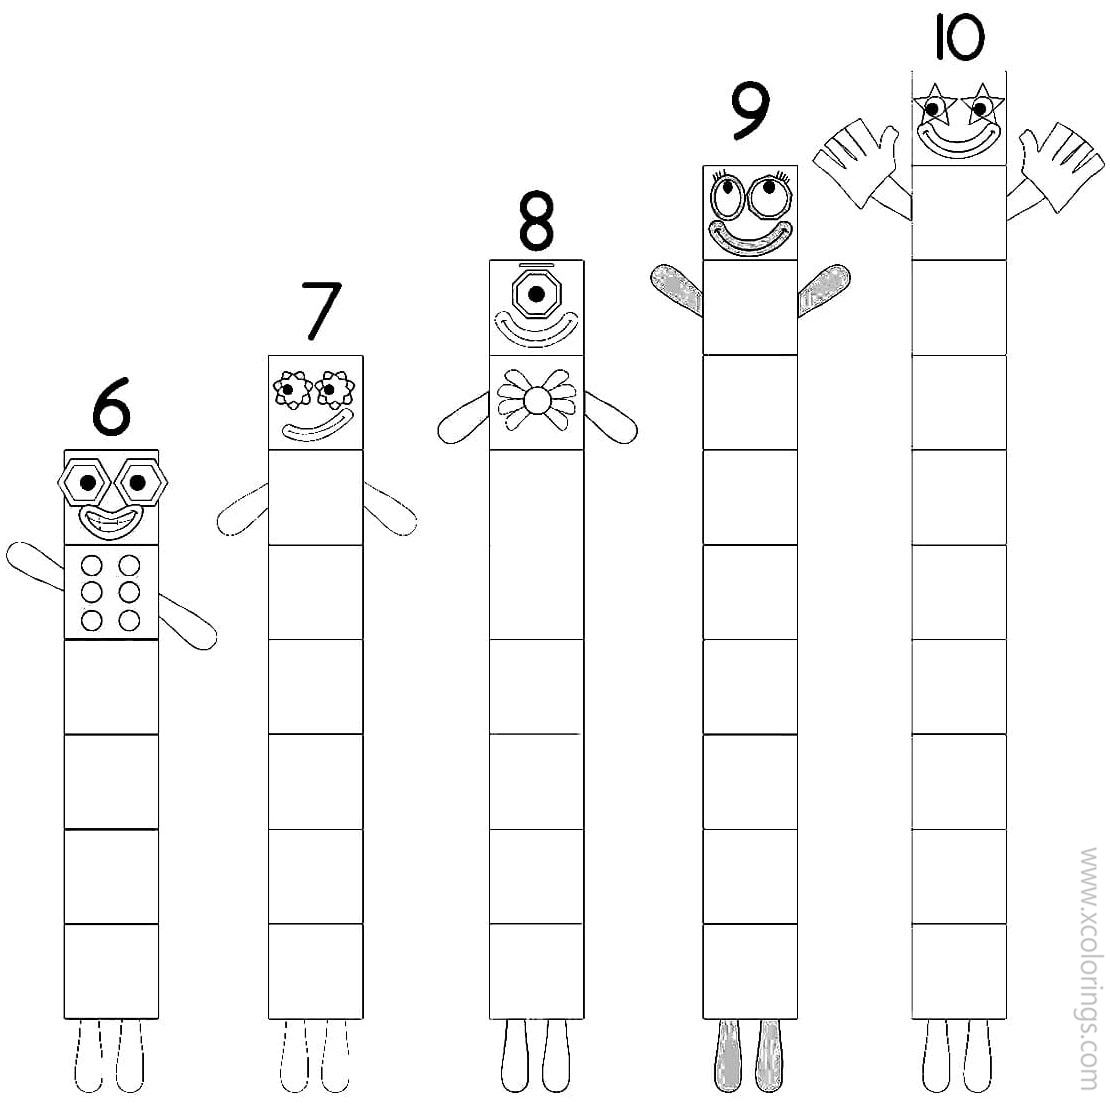 numberblocks-coloring-pages-6-7-8-9-10-xcolorings